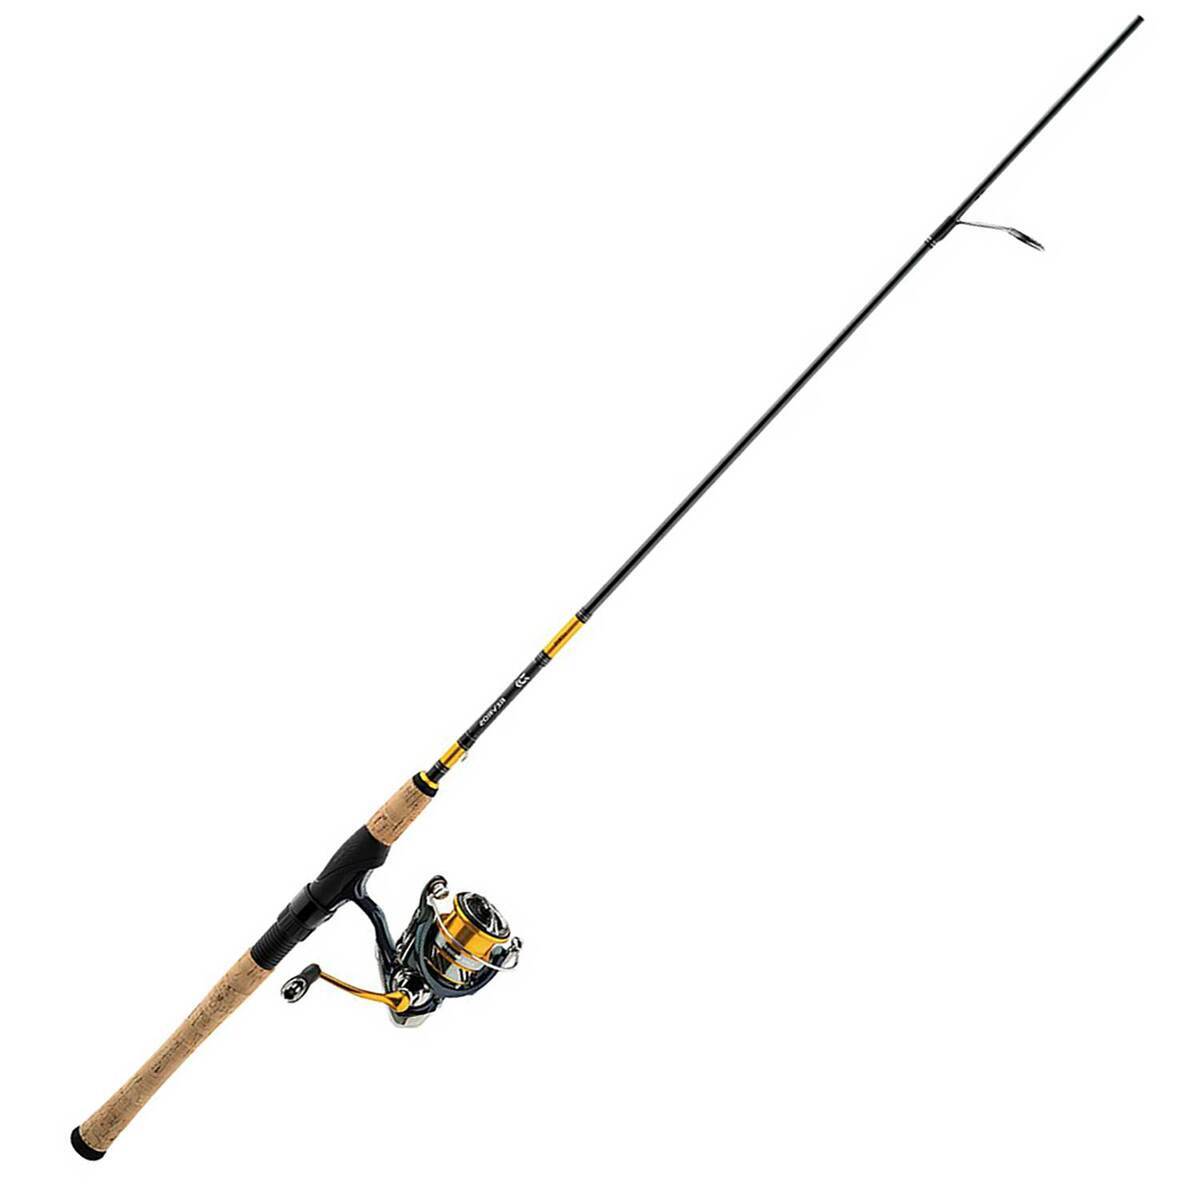  Light Light Stick Clip, Fishing Rod Light Fishing Rod with Abs  : Sports & Outdoors